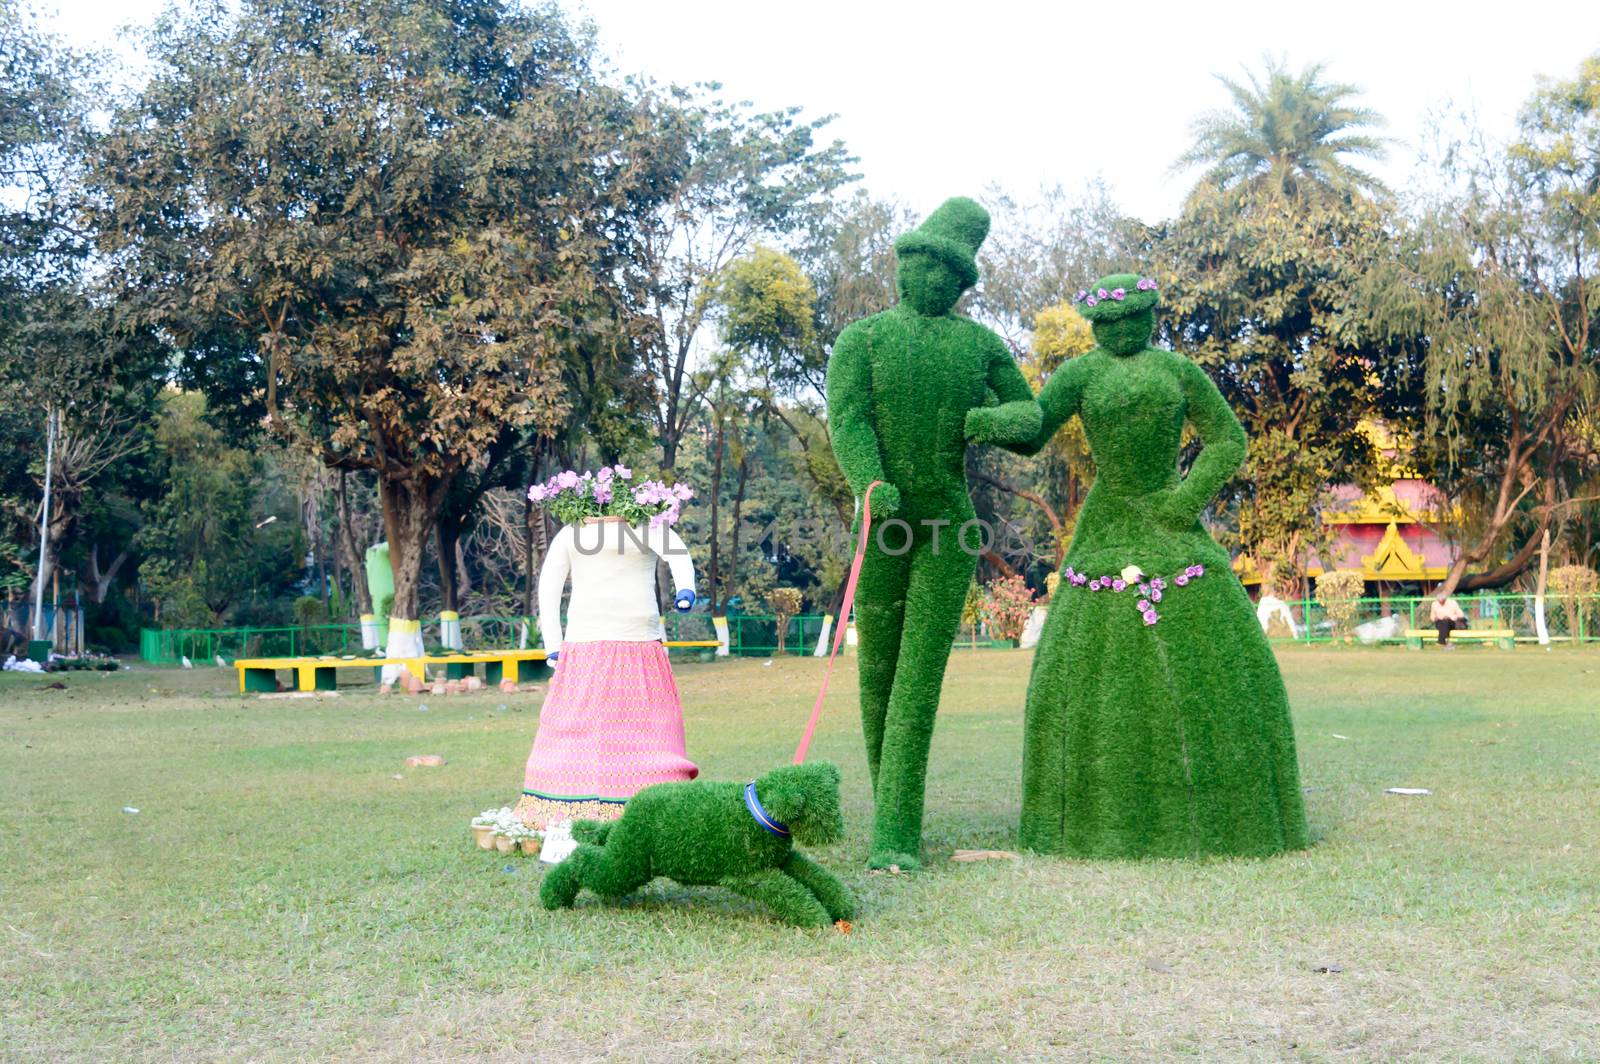 Beautiful Green Topiary art crafted design element representing Happy Couple by clipping pruning twigs and foliage in amazing shape and fanciful hedges. Eden Garden City Park Kolkata May 2019